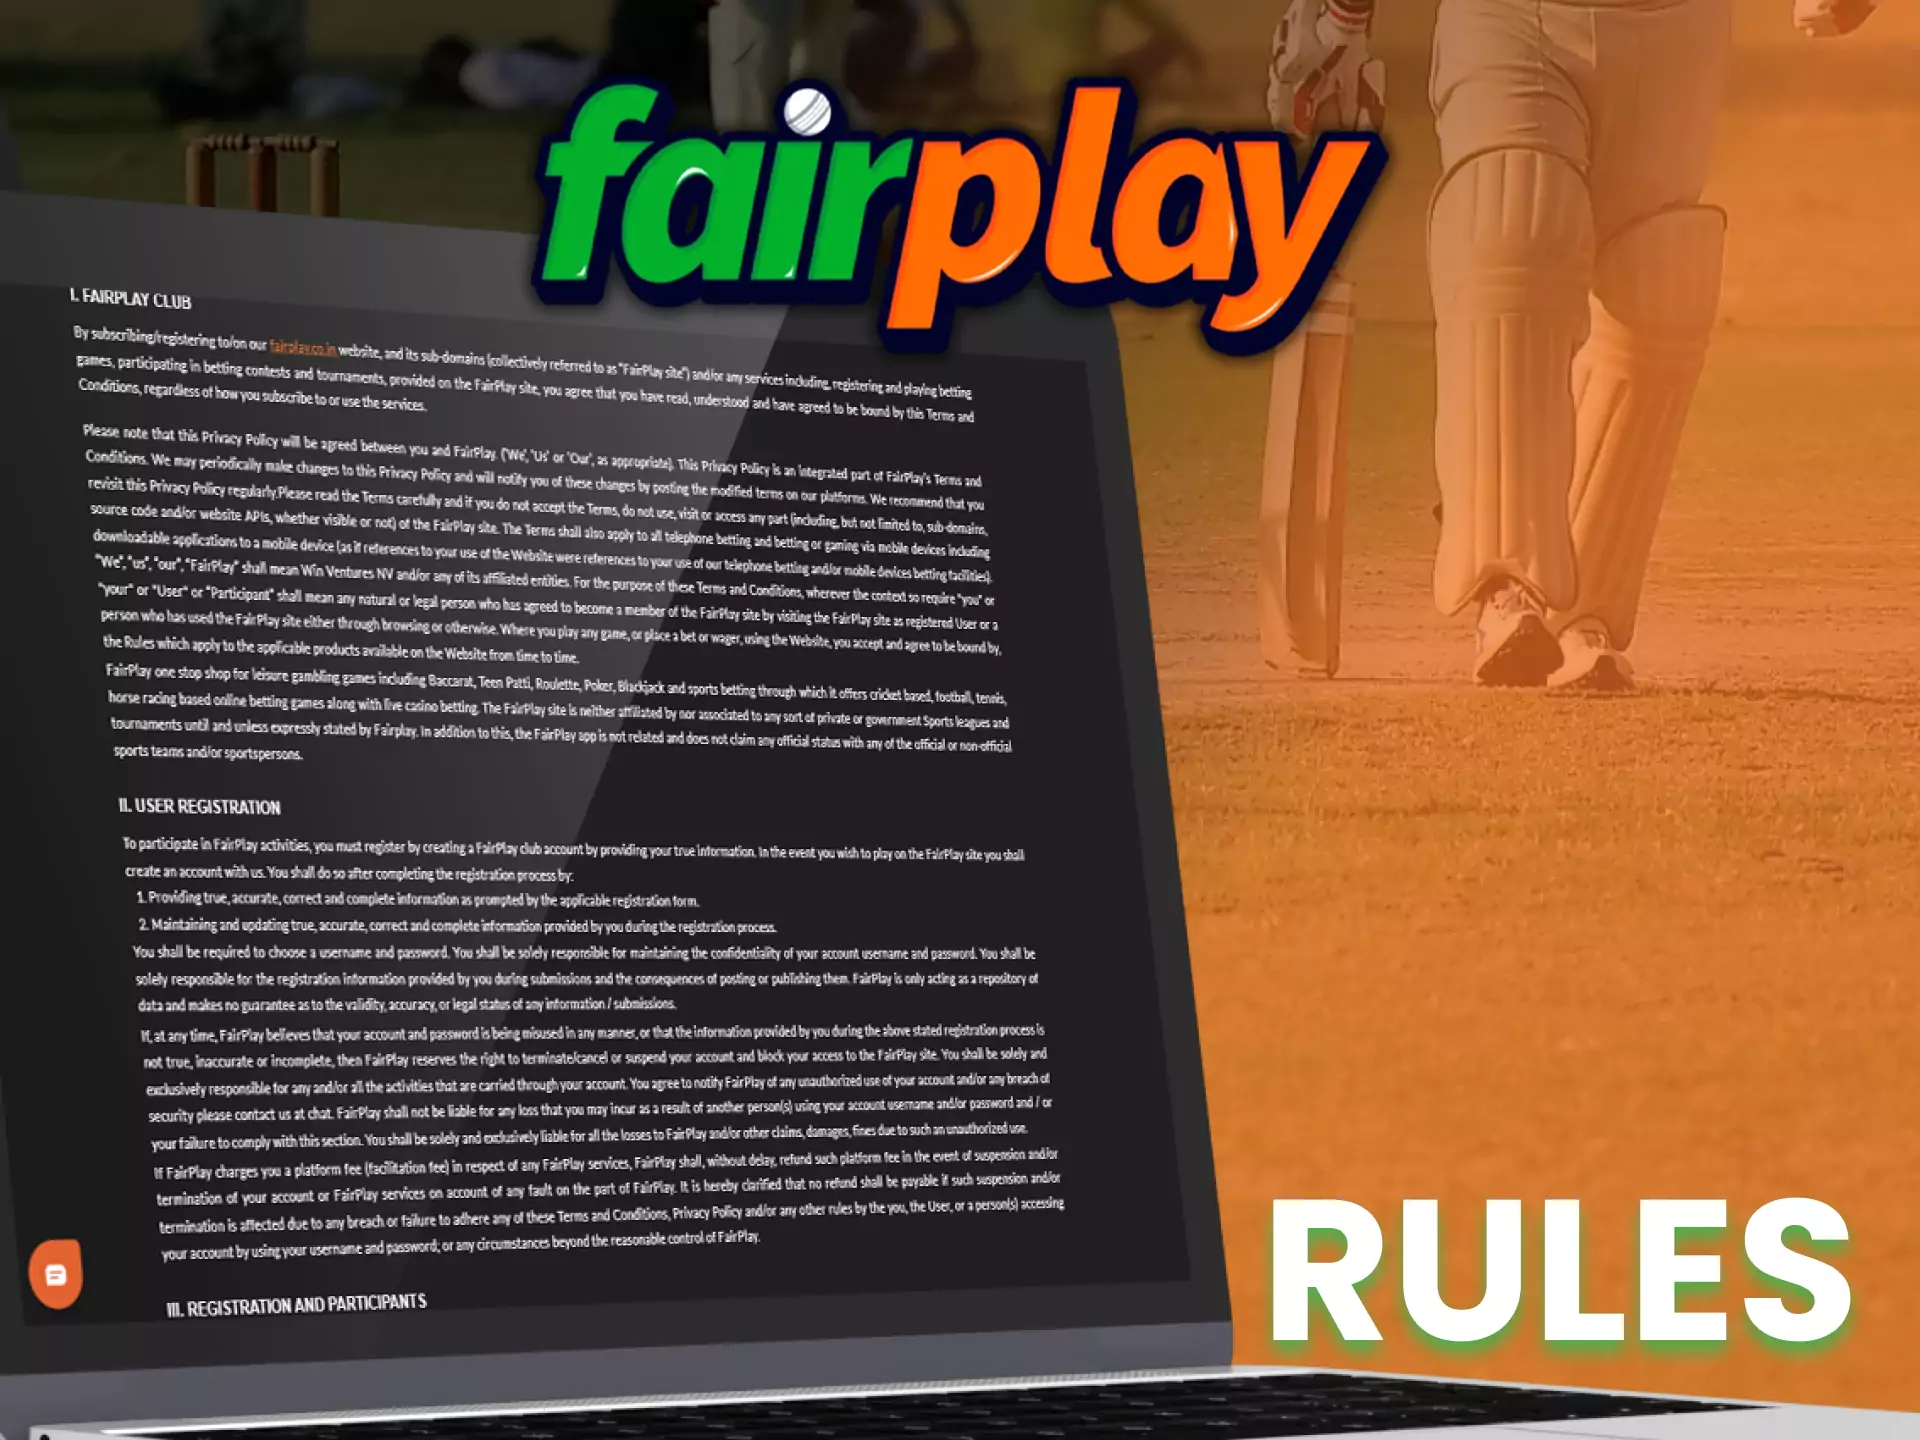 Get to know the basic rules of Fairplay.